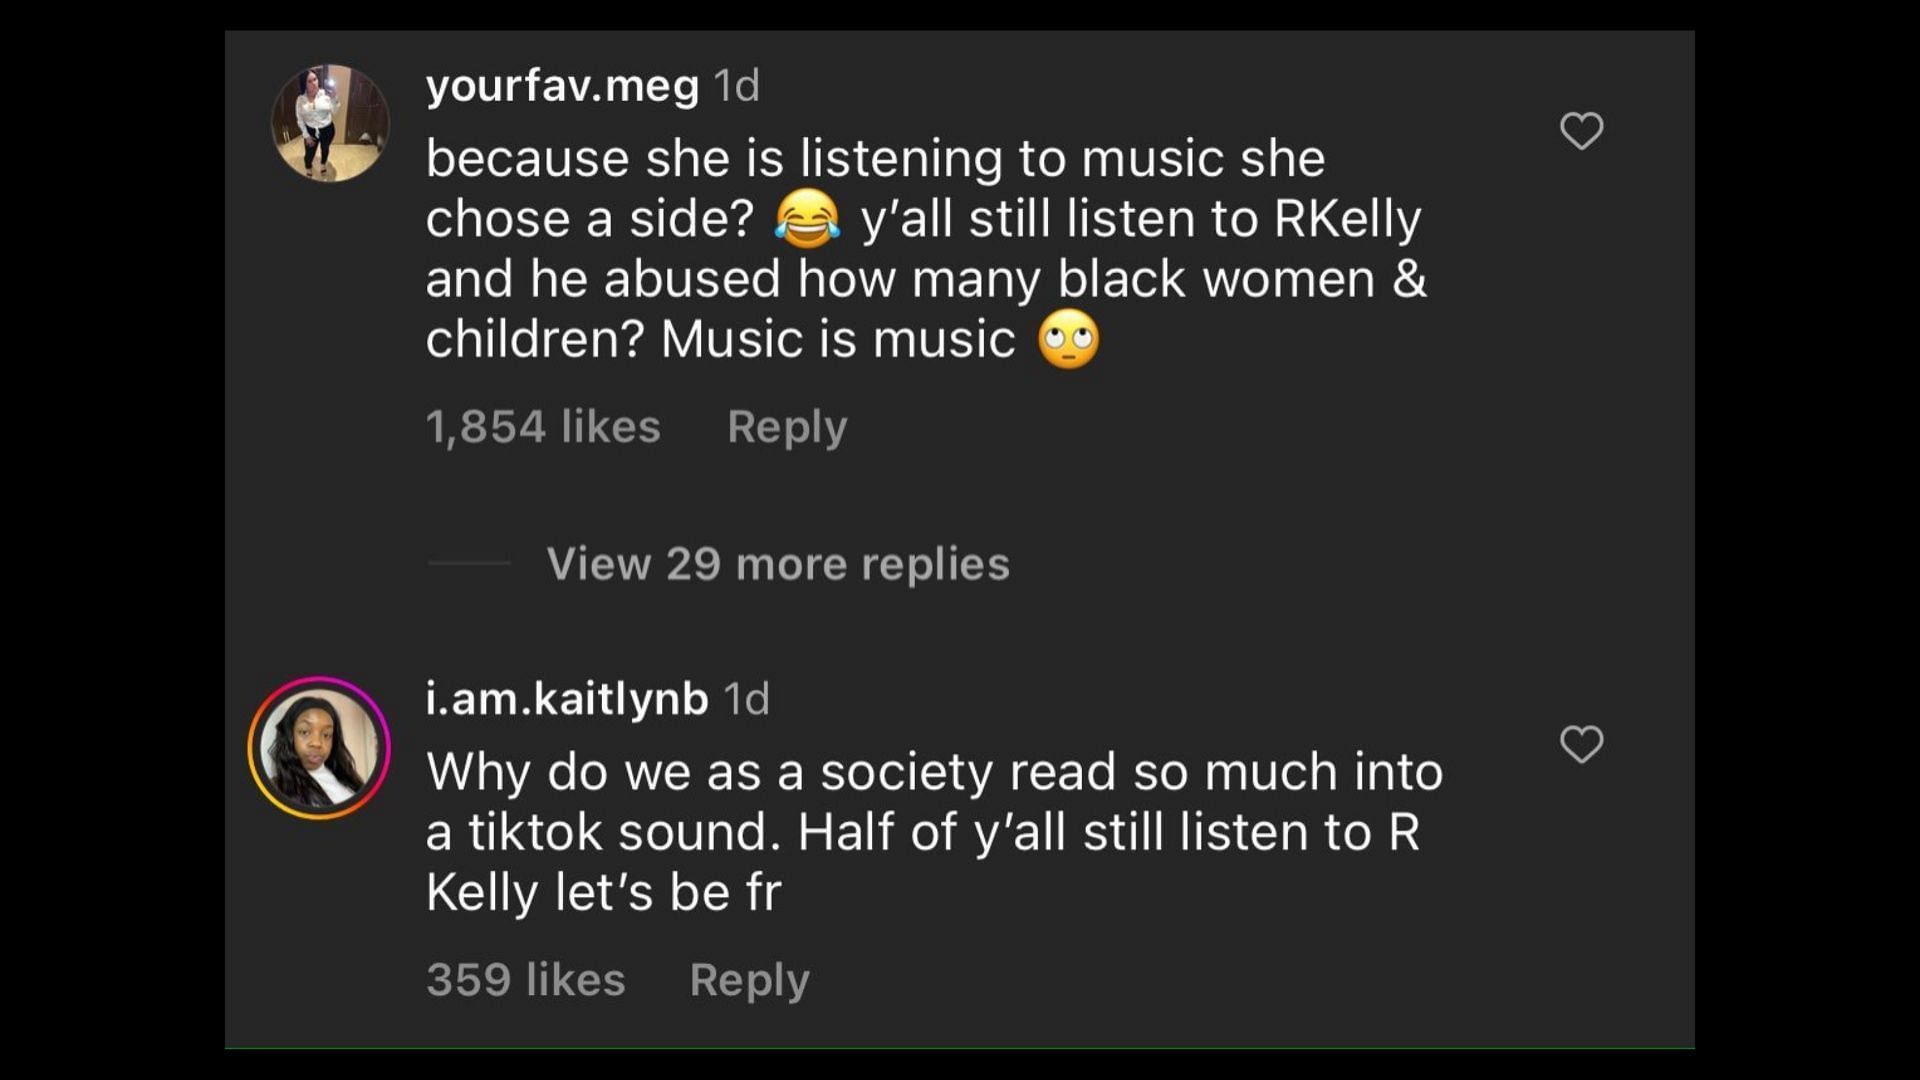 Screenshot of internet users remarking on Jenner playing Tory Lanez&#039;s unreleased song. (Photo via @TheShadeRoom/Instagram)